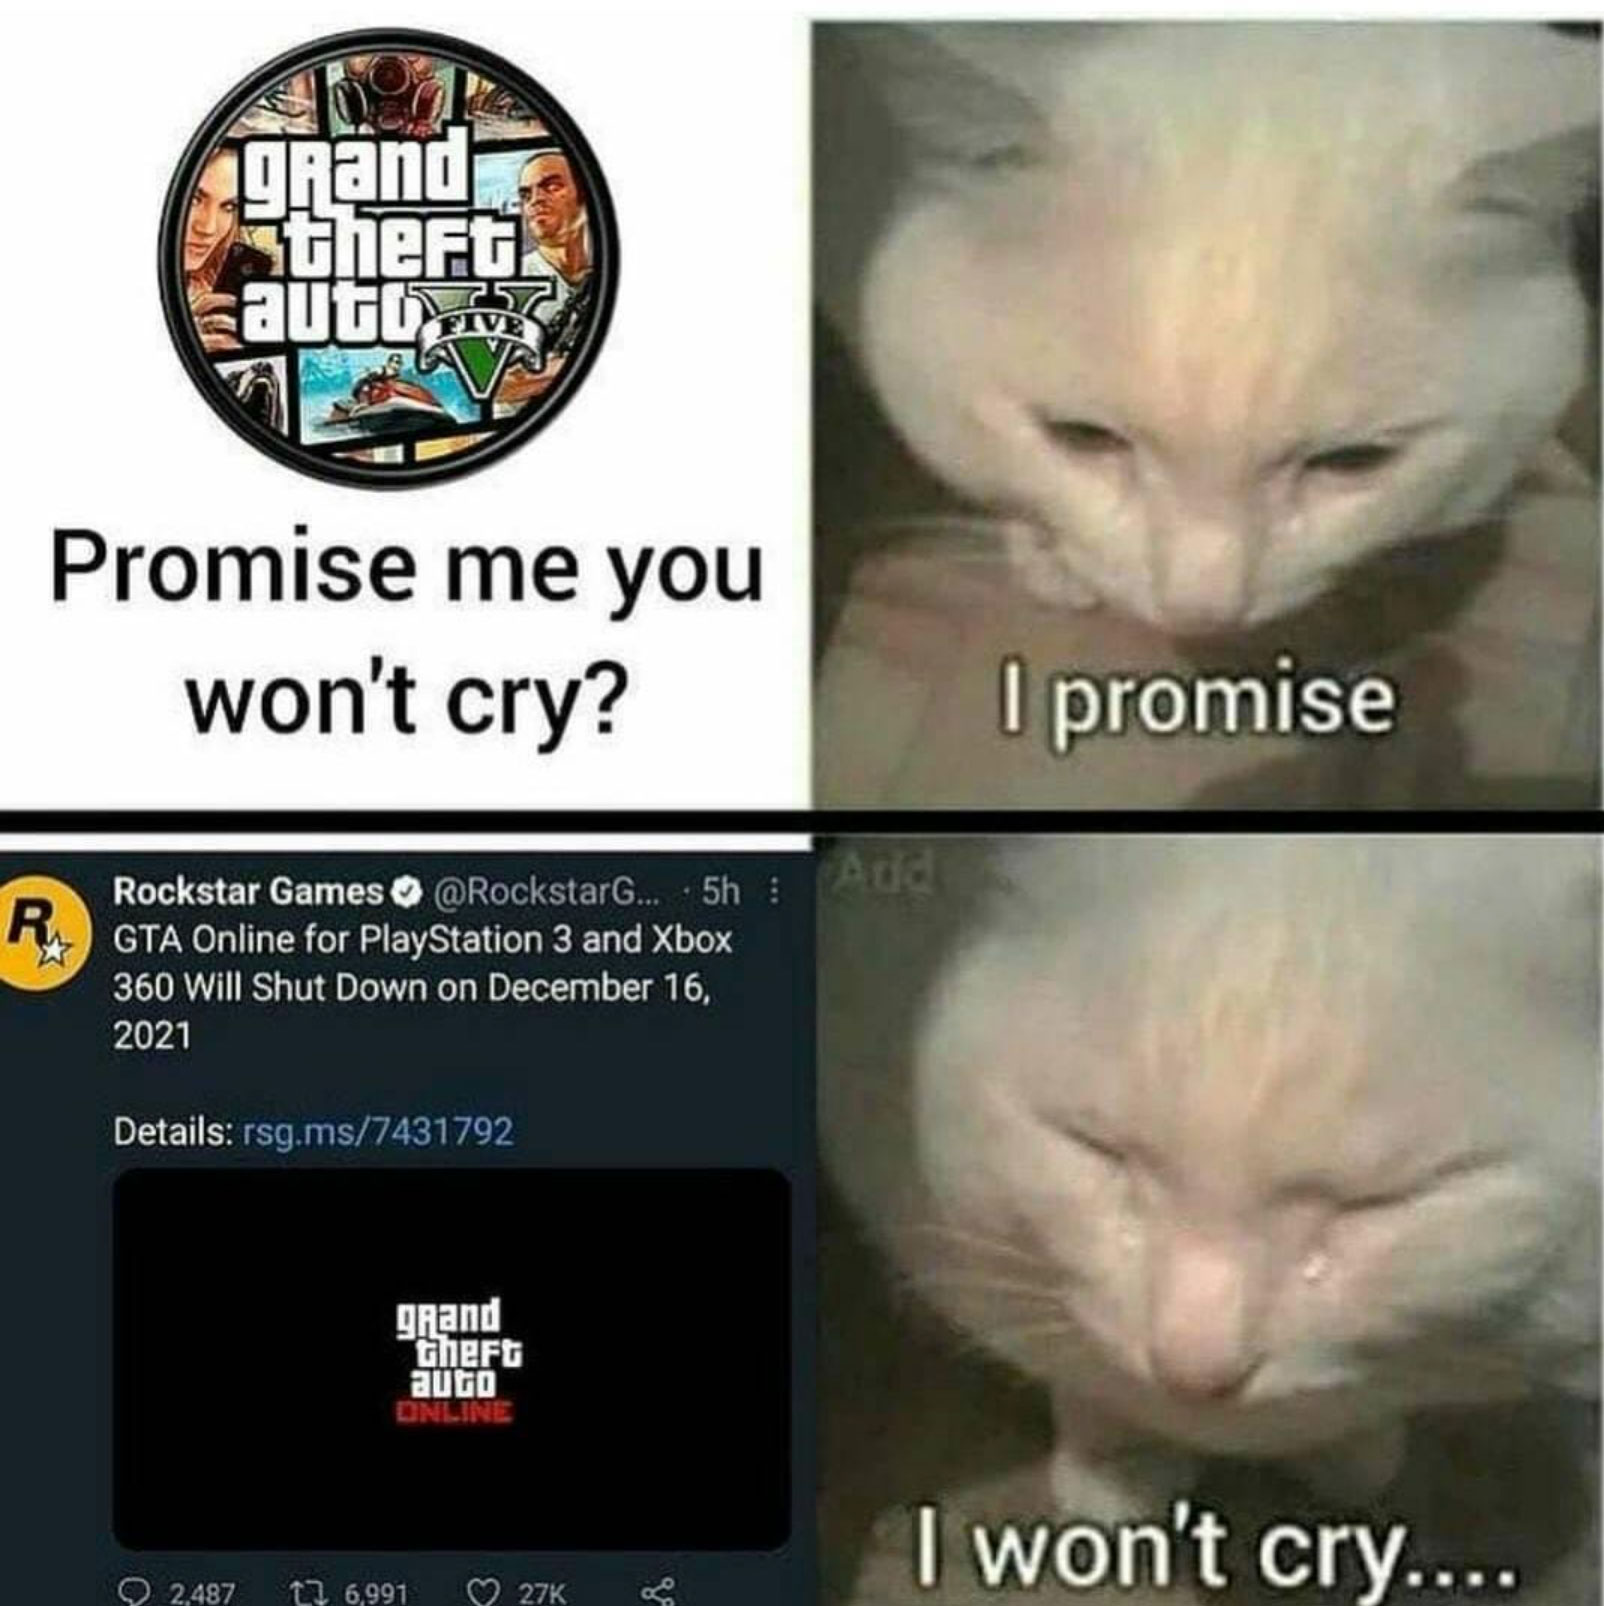 promise me you won t cry - grand Stinert auto Five Promise me you won't cry? I promise Rockstar Games ... 5h R Gta Online for PlayStation 3 and Xbox 360 Will Shut Down on Details rsg.ms7431792 grand theft auto Online I won't cry.... 2,487 12 6,